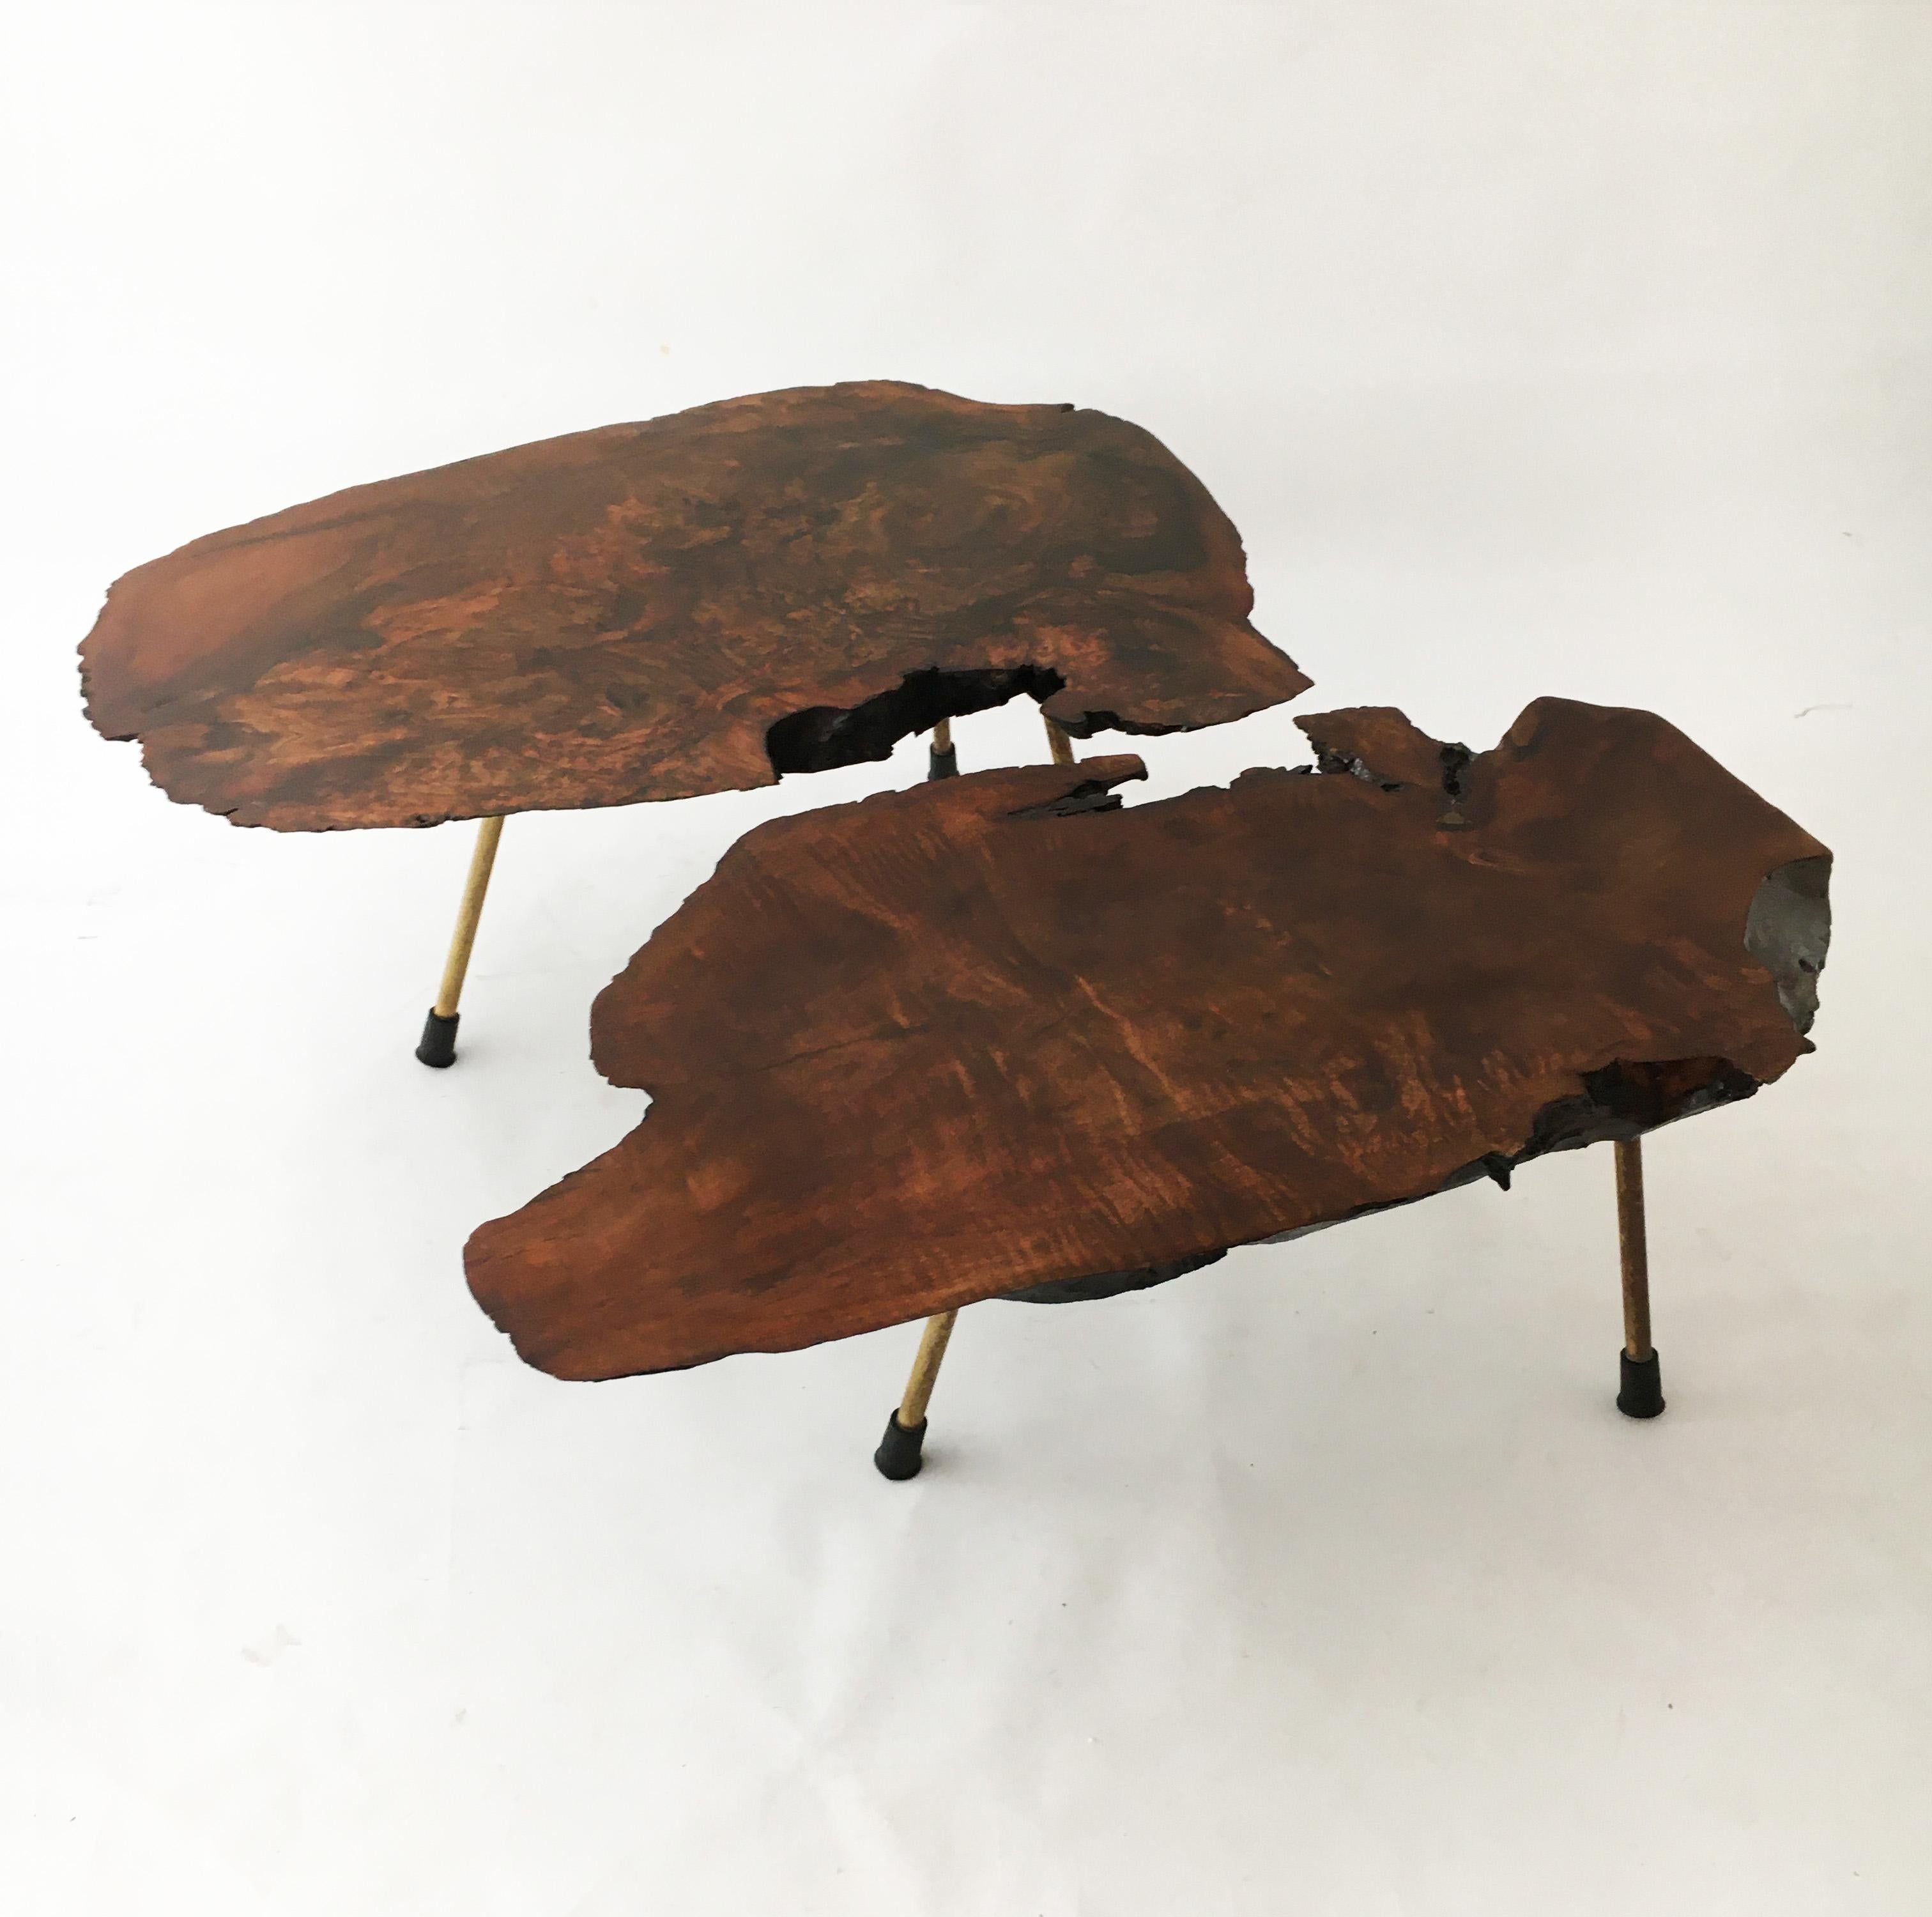 Carl Auböck large walnut tree trunk tables, set of two, Austria 1950s. Signed 'Auböck' on the brass legs. Legs numbered with corresponding number embossed into the wood slab. The tabletop was re-polished under guidance from Mr. Auböck IIII. with to